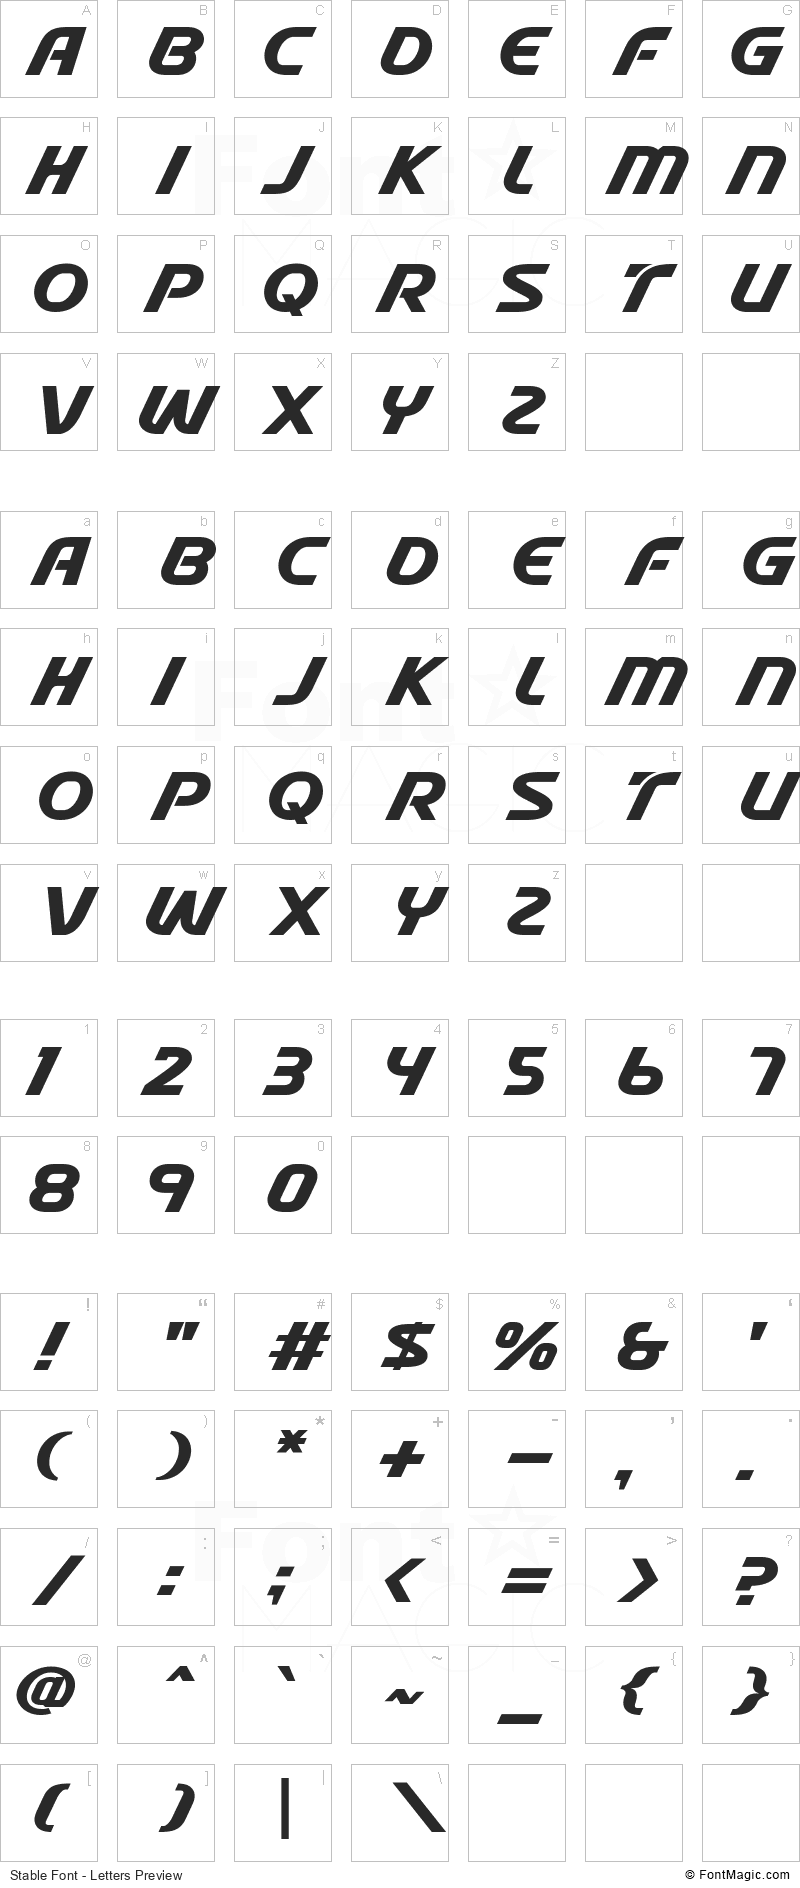 Stable Font - All Latters Preview Chart